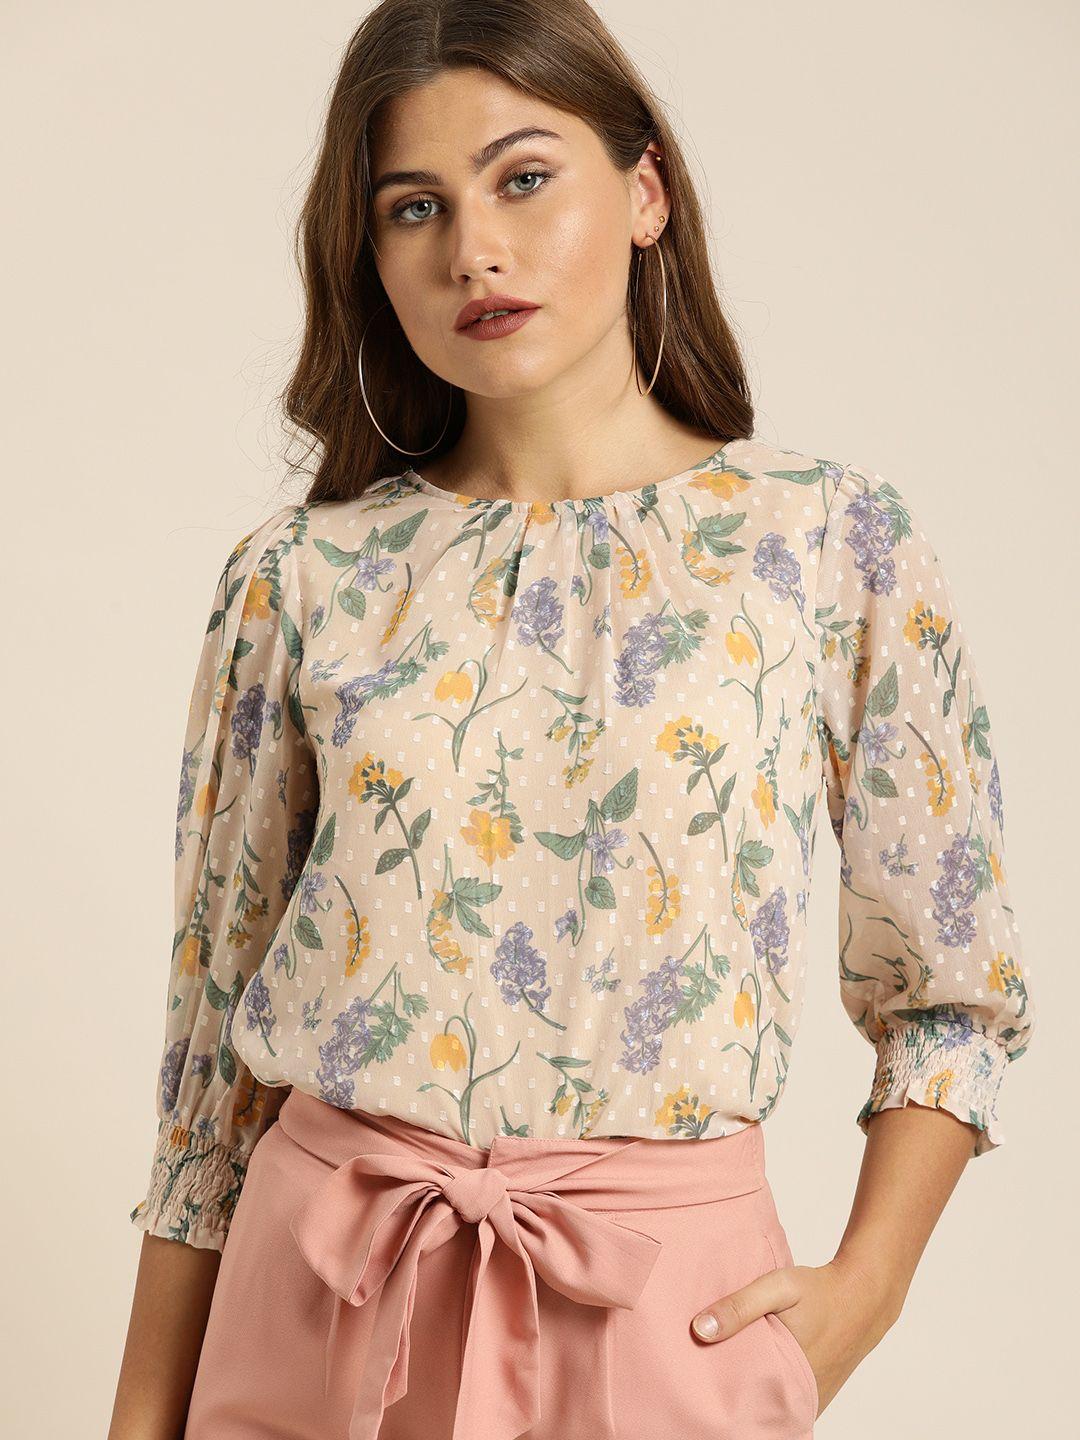 all about you beige & green dobby weave floral printed top